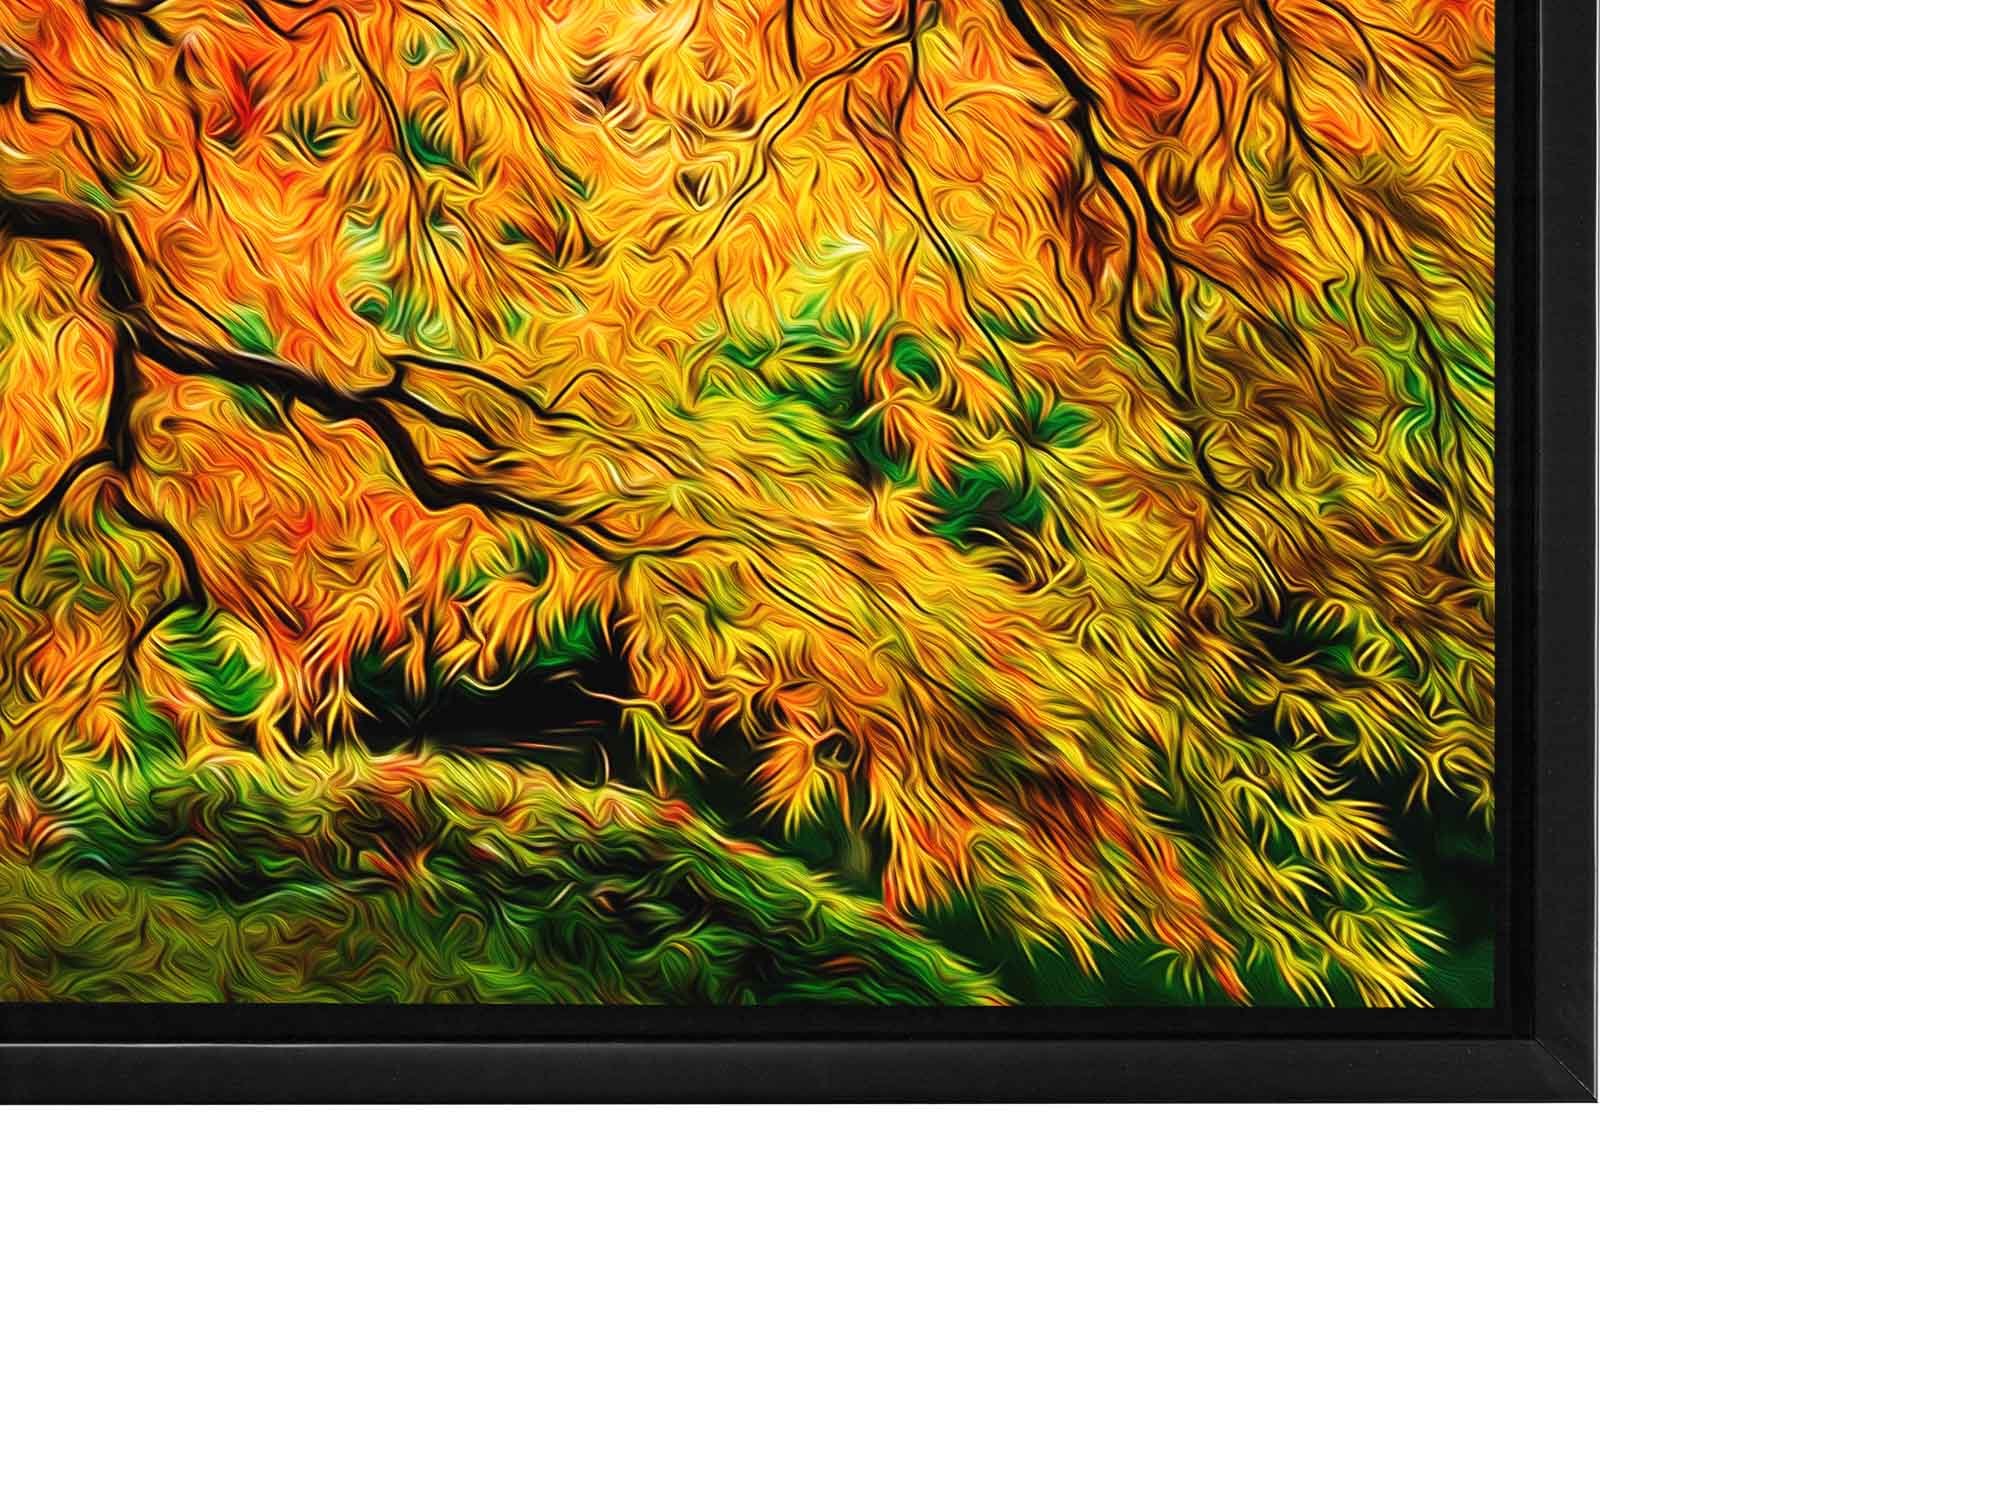 Oil Paint Artistic Tree with Multi Color Shimmering Top Coat 36" X 48"